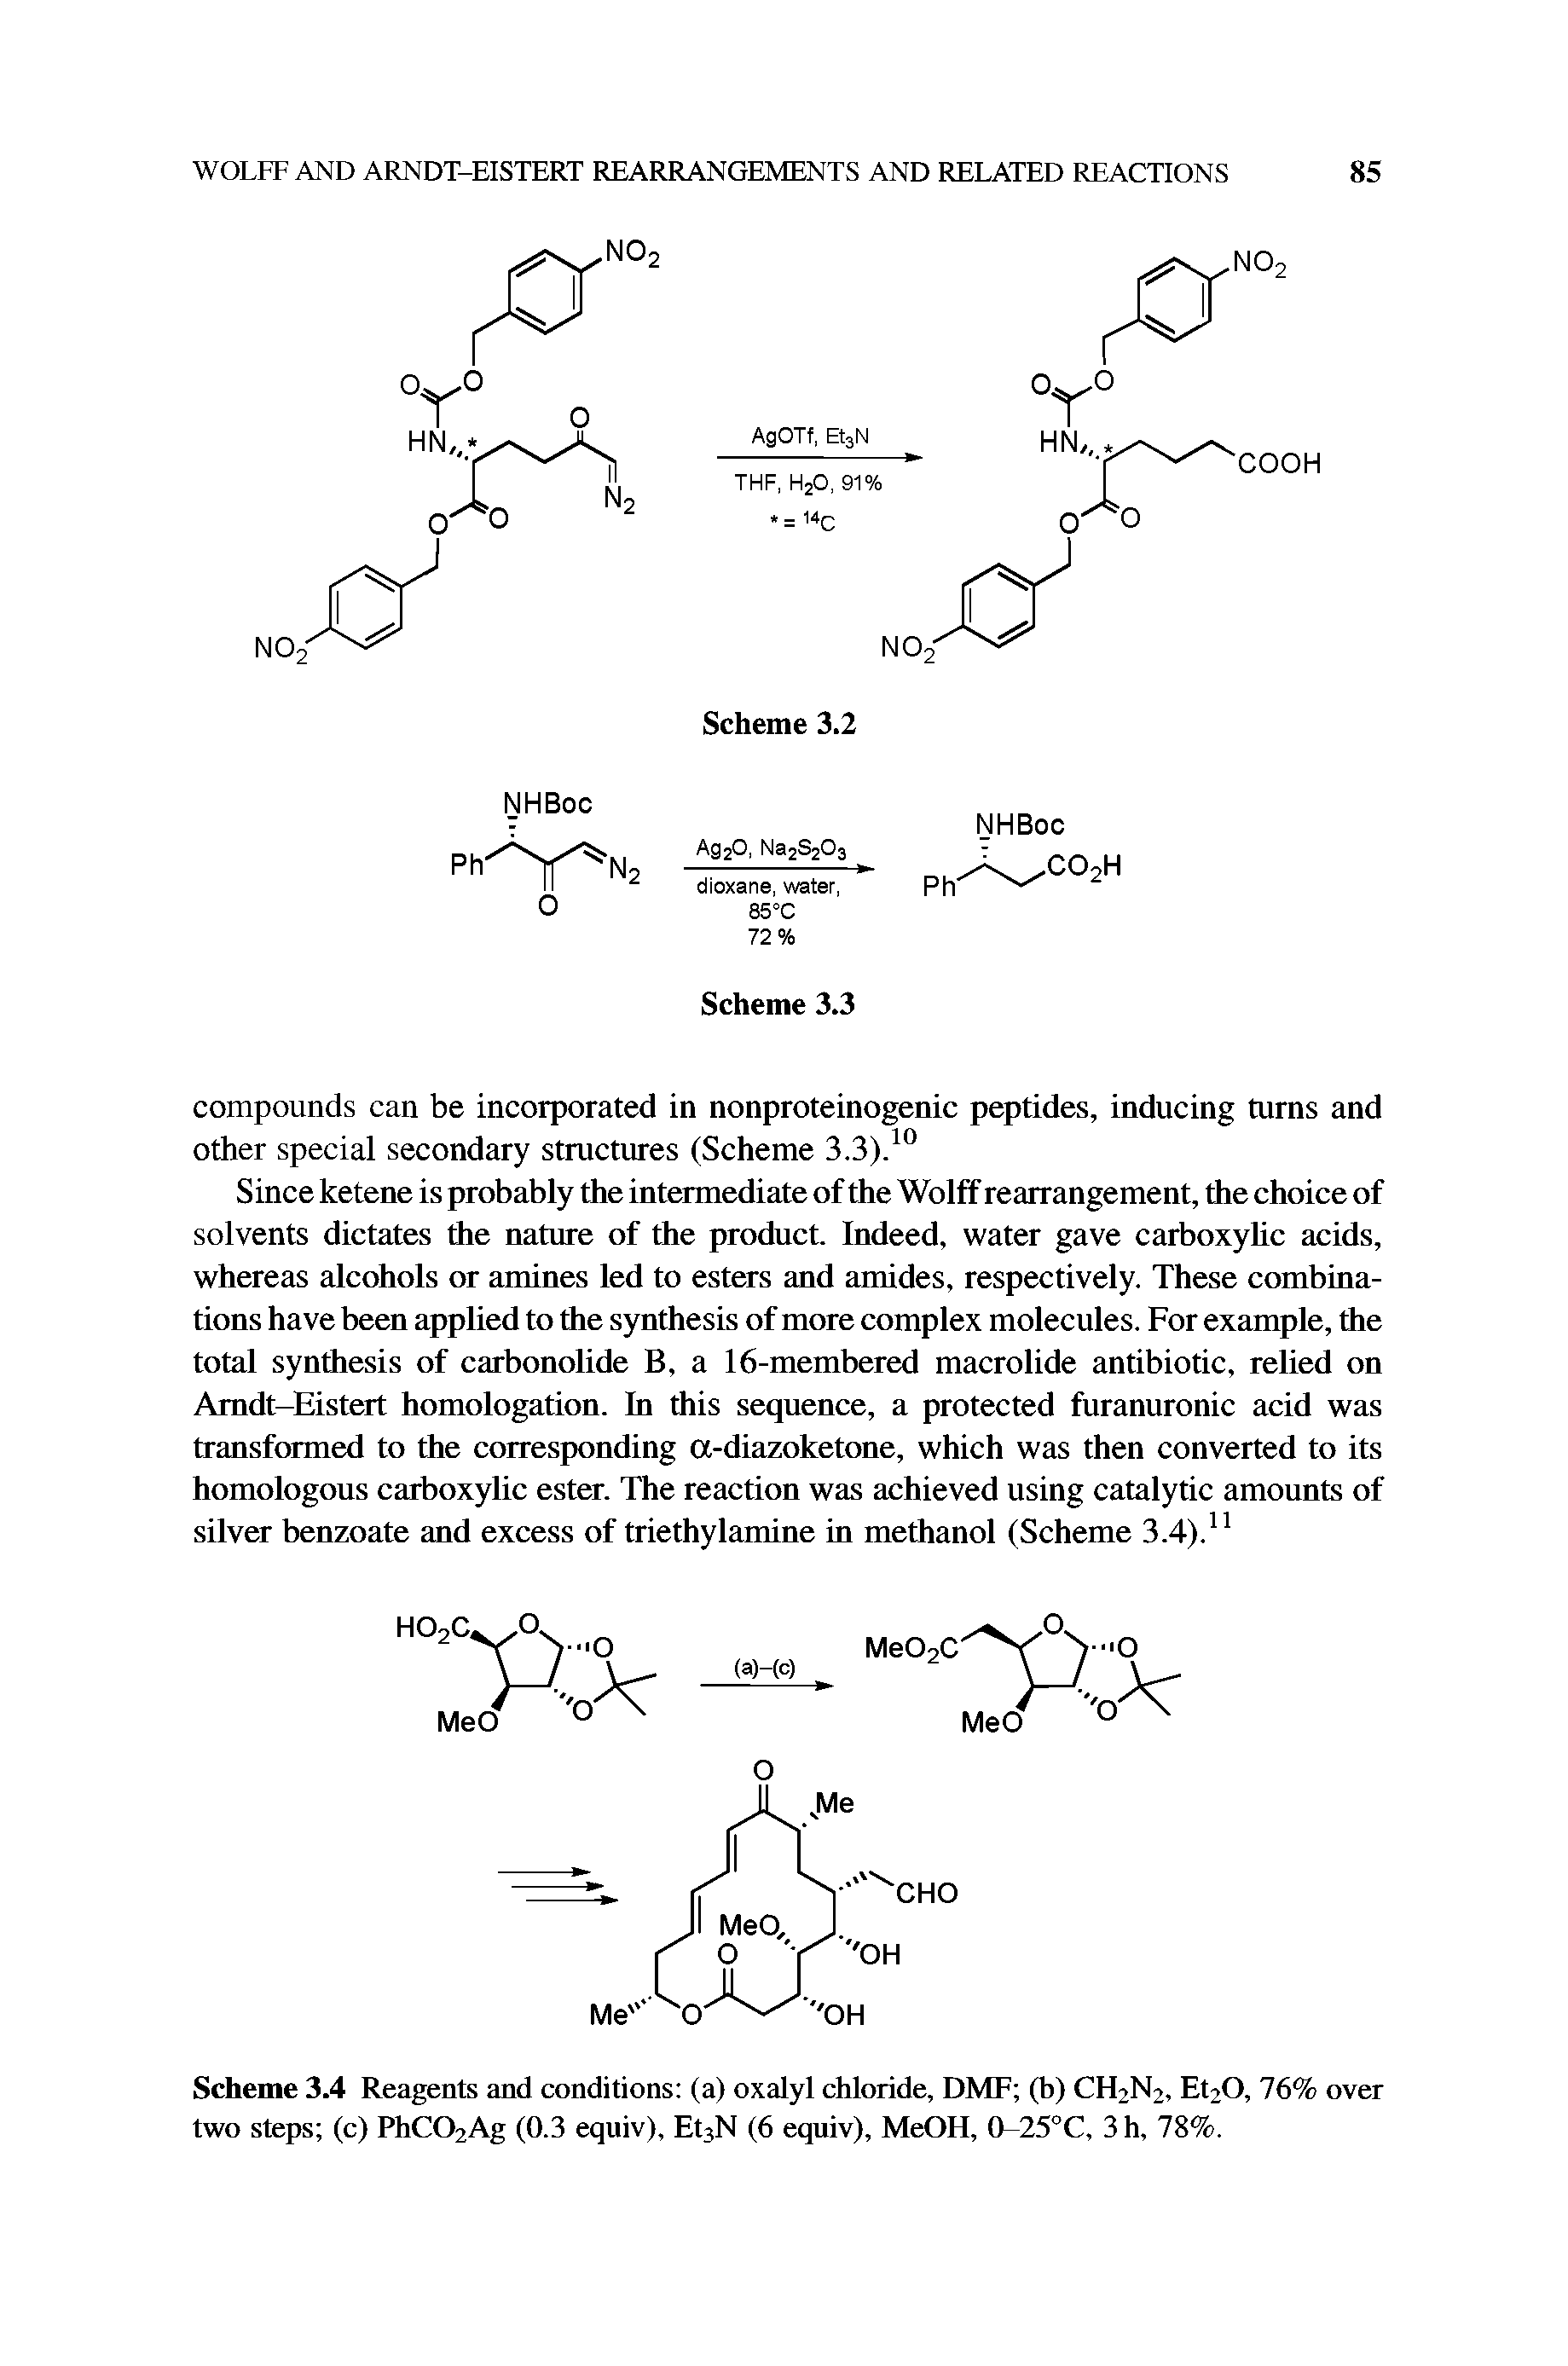 Scheme 3.4 Reagents and conditions (a) oxalyl chloride, DMF (b) CH2N2, Et20, 76% over two steps (c) PhC02Ag (0.3 equiv), Et3N (6 equiv), MeOH, 0-25°C, 3h, 78%.